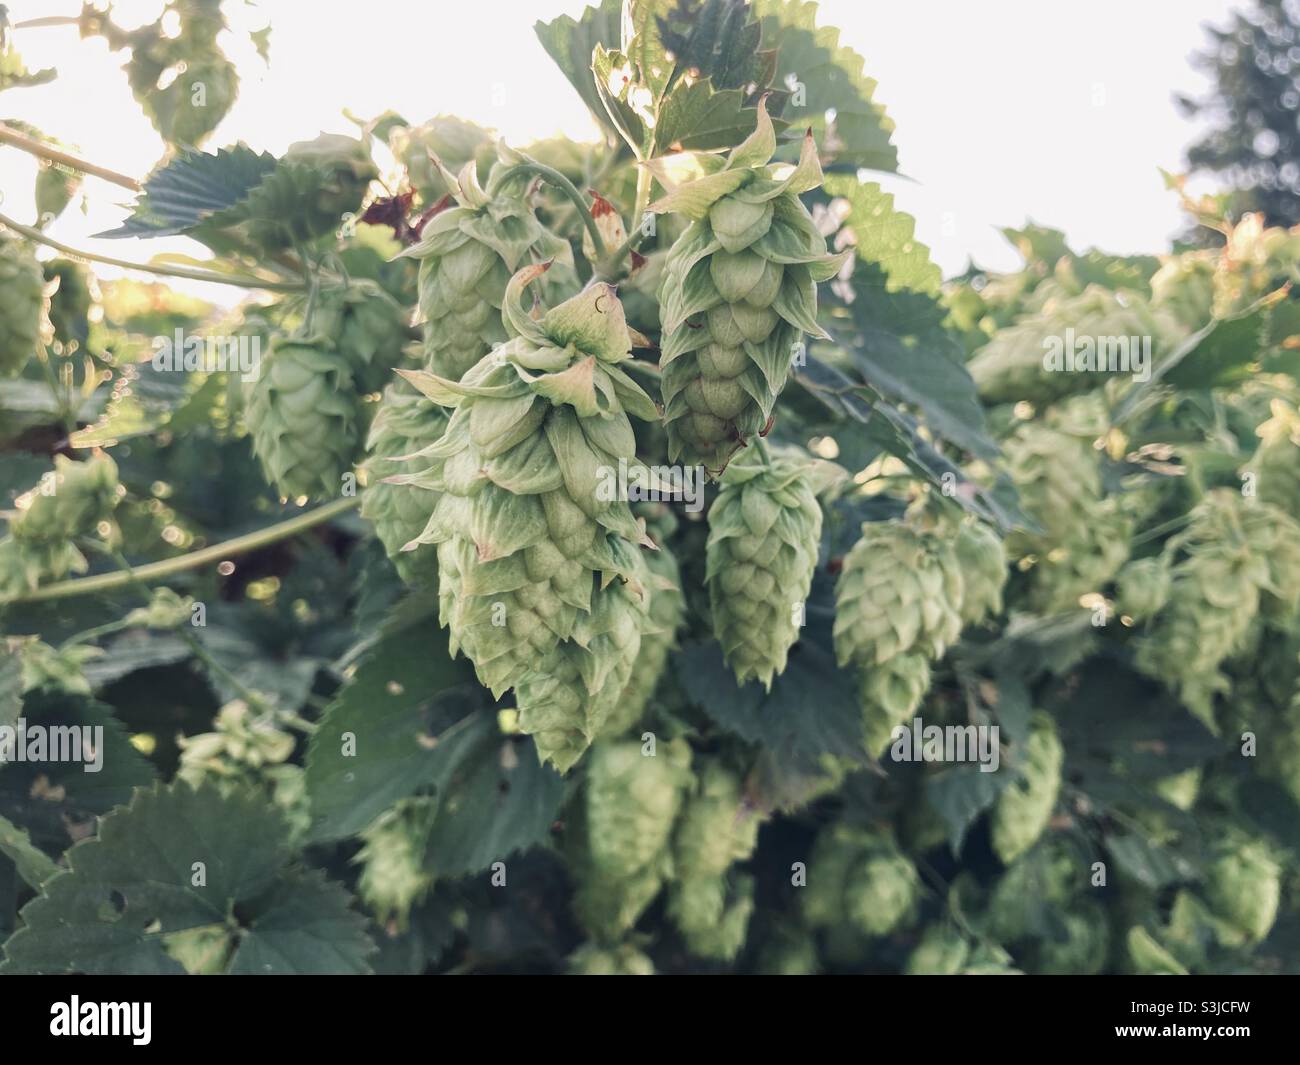 Hops ready for harvest in Oregon’s Willamette Valley. Stock Photo